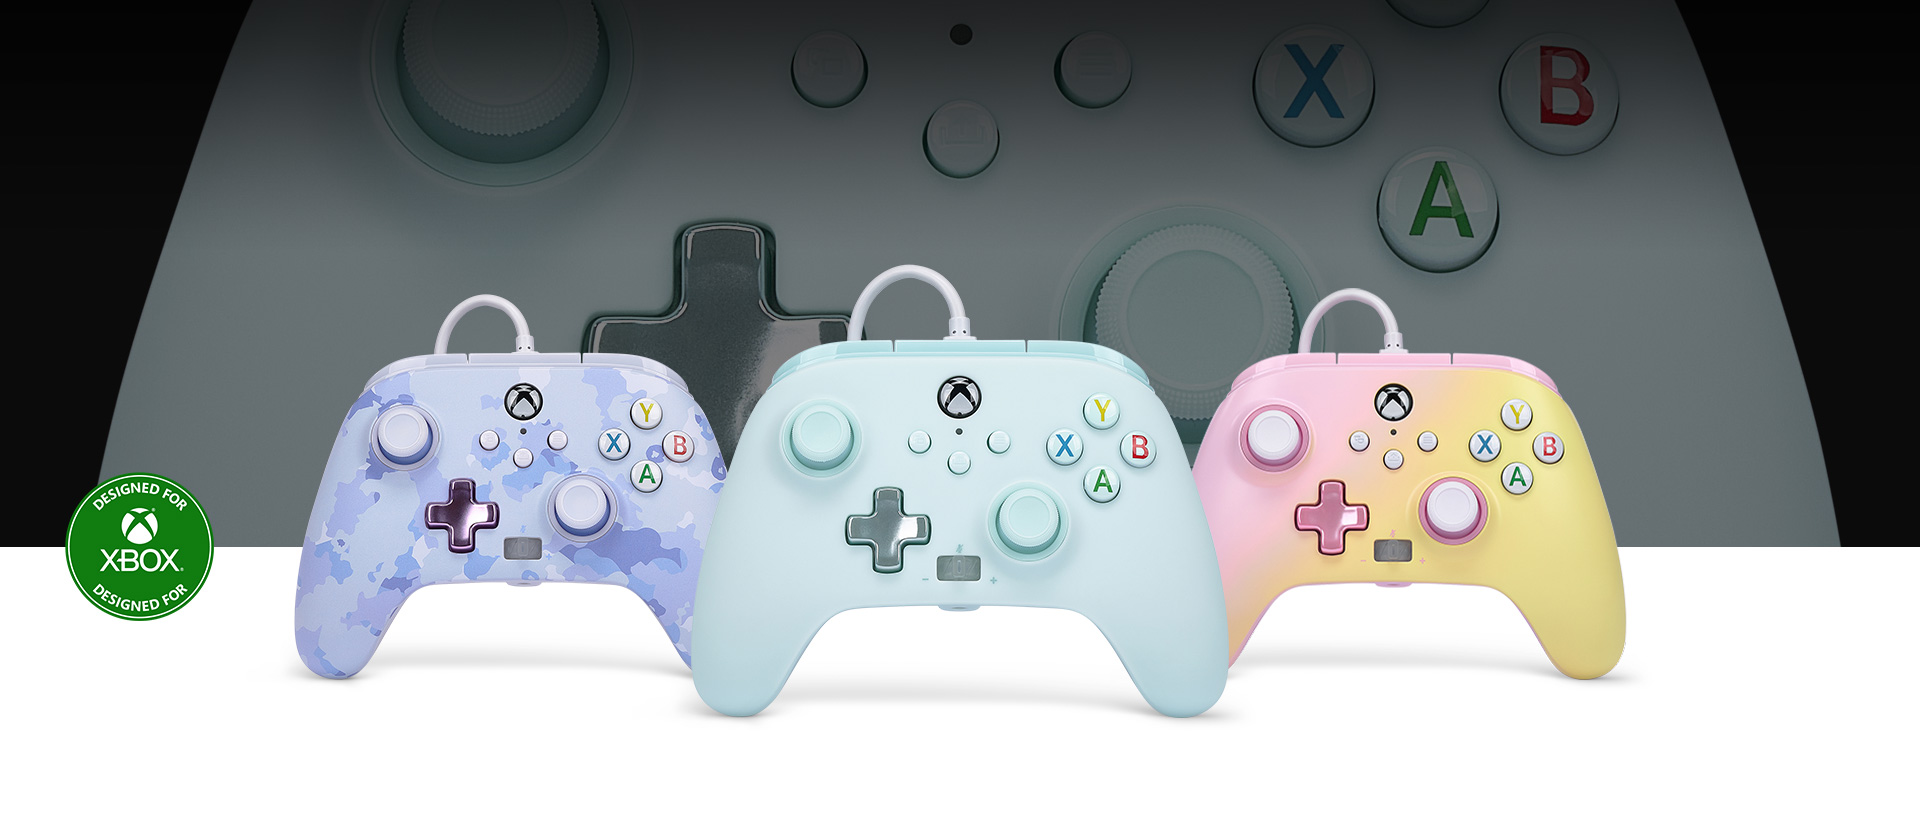 Designed for Xbox logo, Cotton Candy Blue controller in front with the Purple Camo and Pink Lemonade controllers beside it